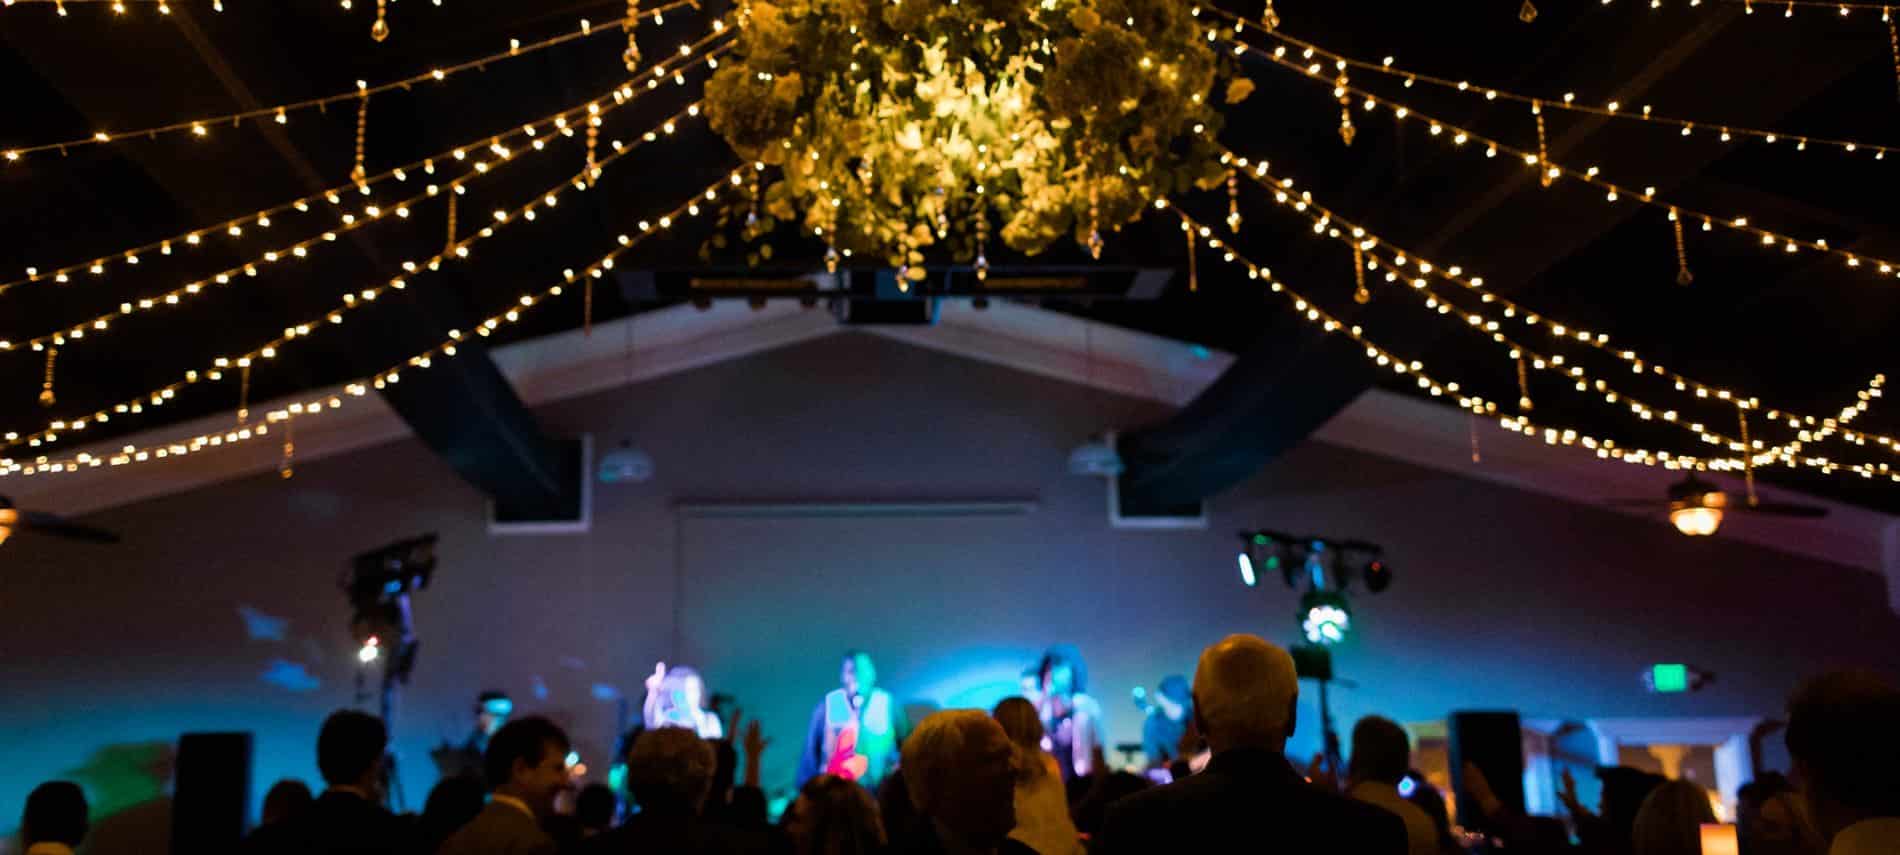 Wedding celebration at night with twinkle light ropes overhead and a stage with colorful lights